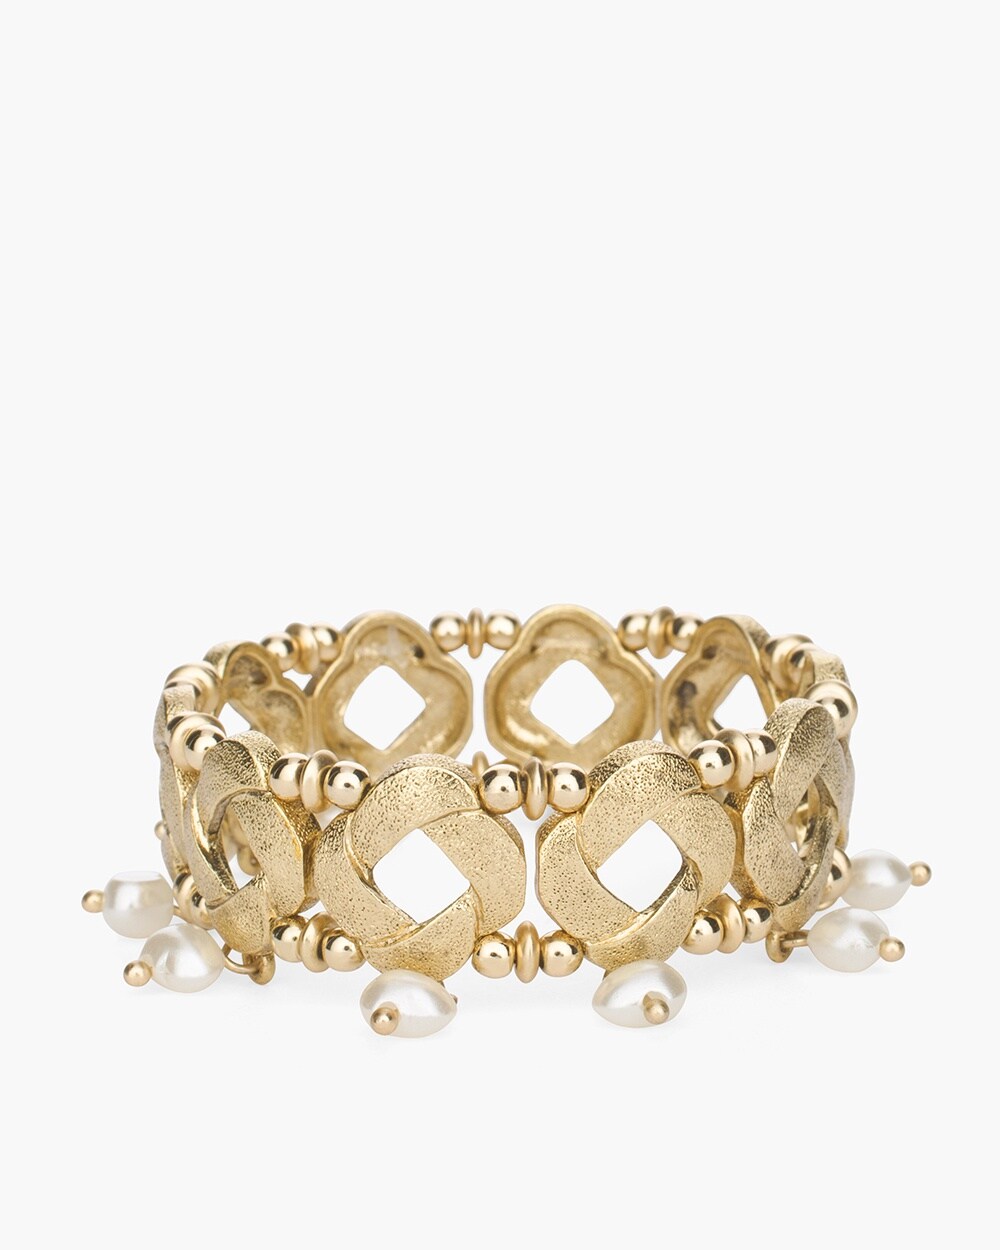 Gold-Tone and Faux-Pearl Stretch Bracelet